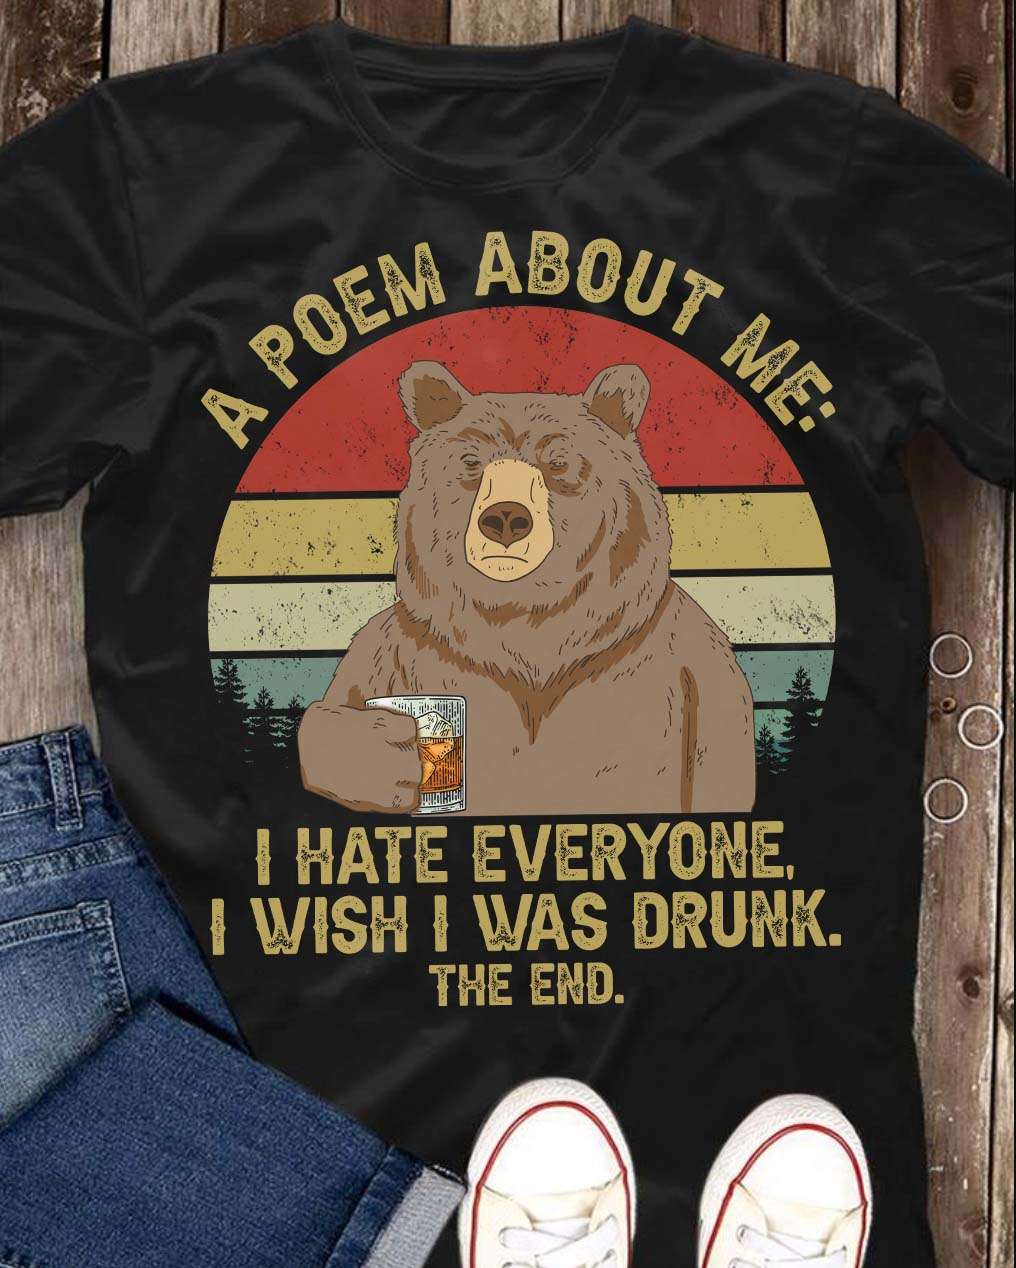 A poem about me - I hate everyone, I wish I was drunk, bear and beer